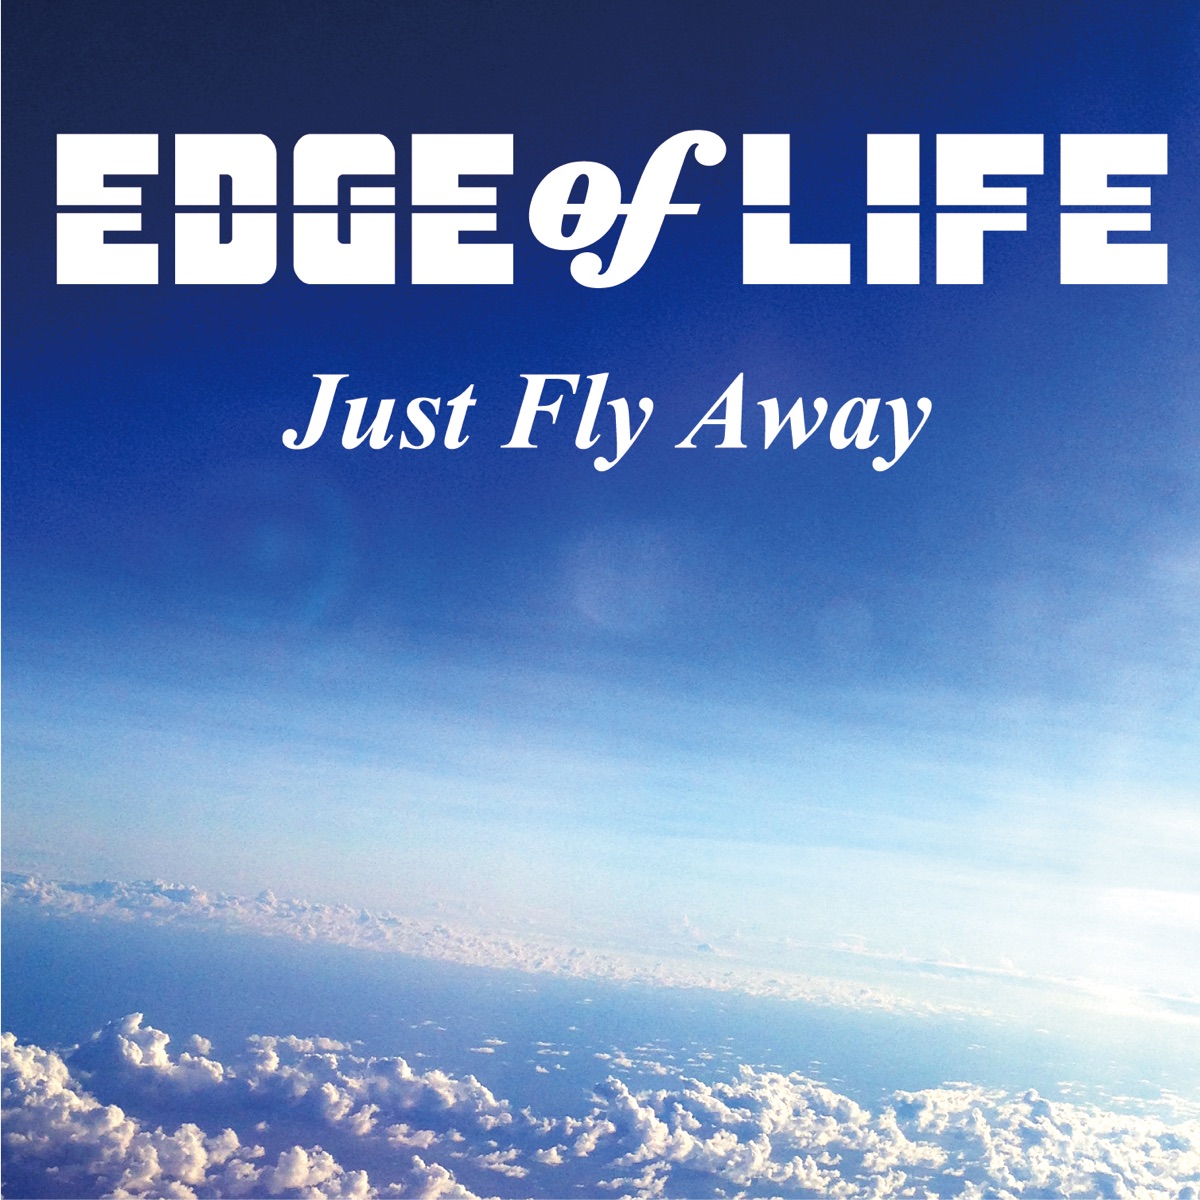 Believe in Myself (Anime Version) - Single by EDGE of LIFE on Apple Music